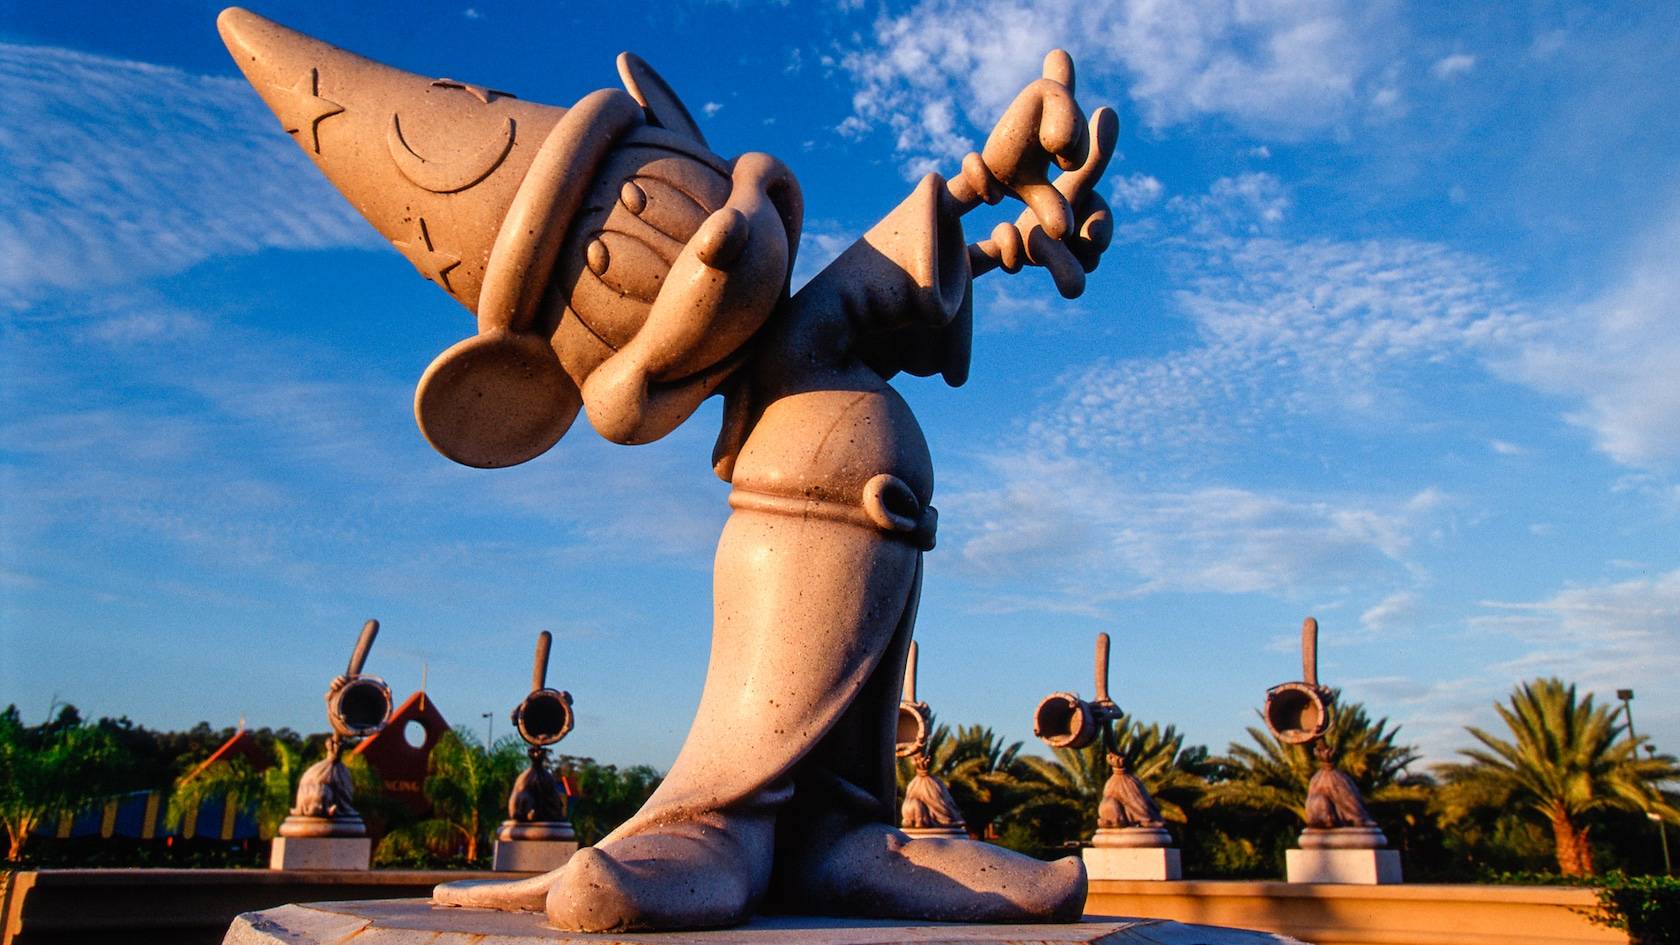 Fantasia Gardens Mini Golf closed for the remainder of the day due to weather (4pm)